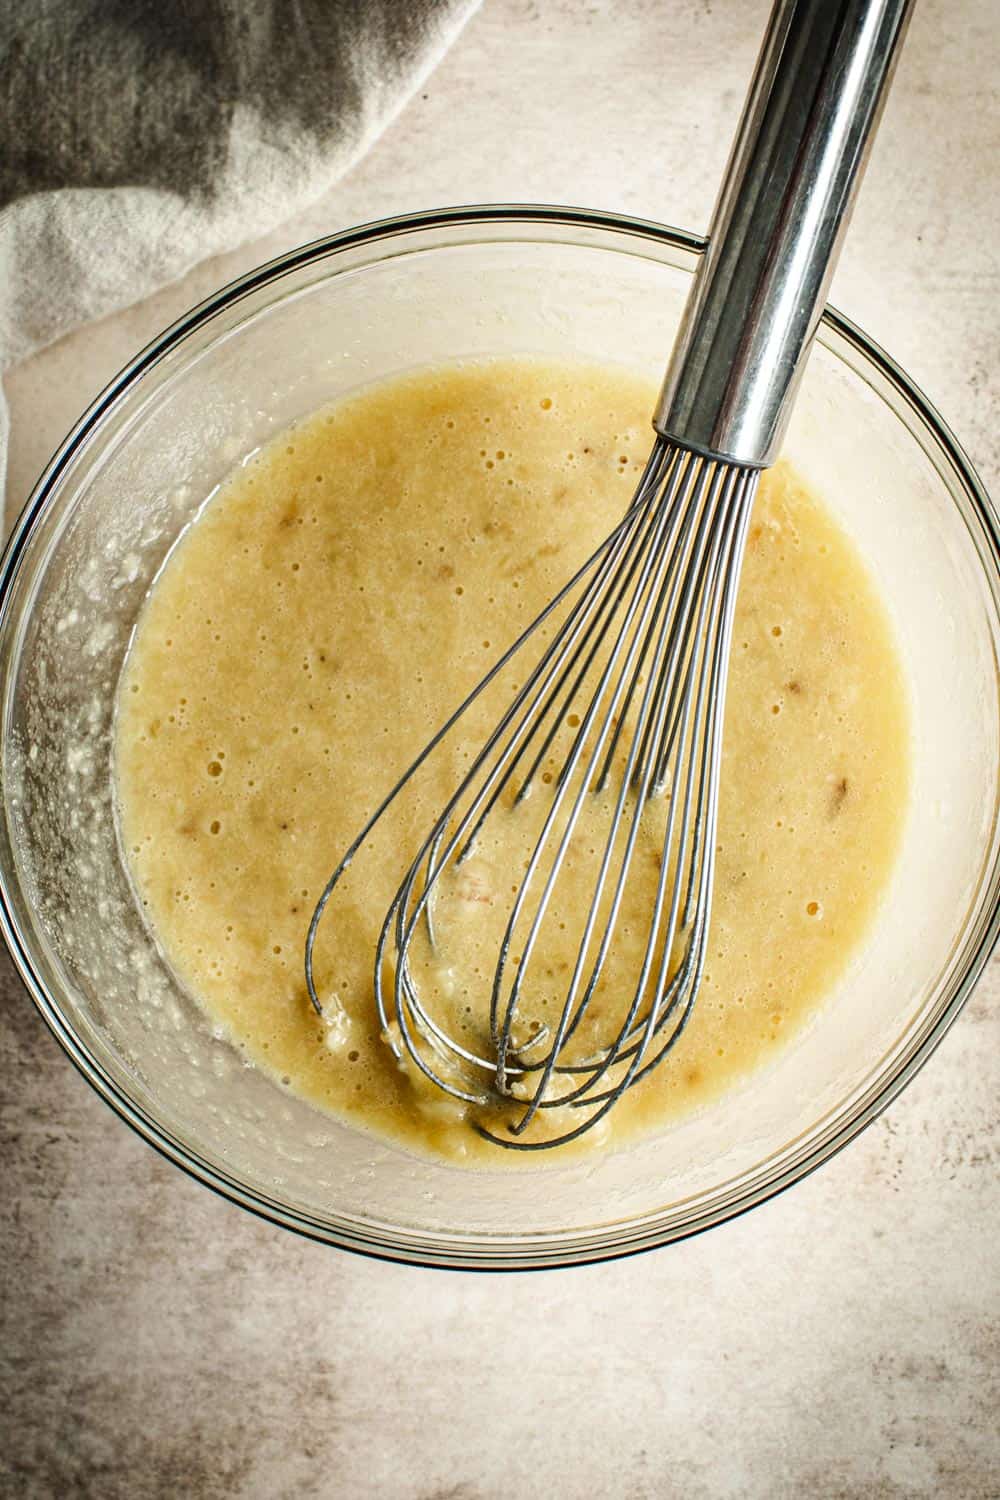 Banana bread ingredients mixing in a bowl with a wire whisk.